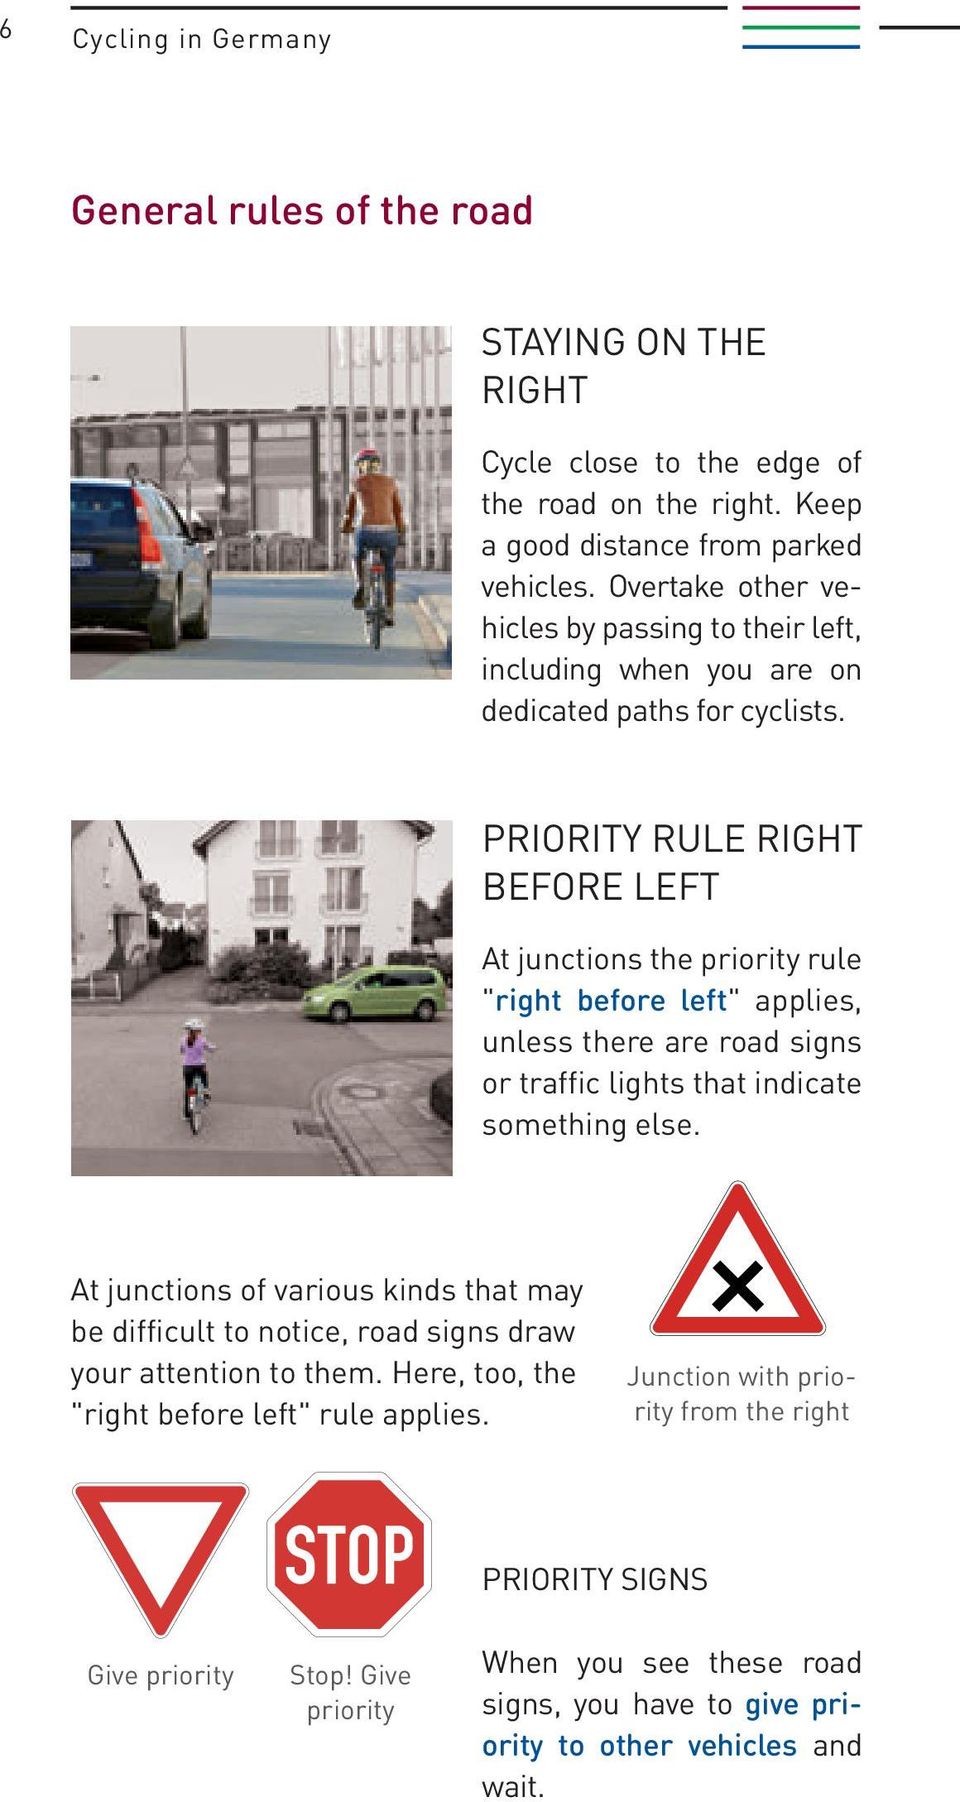 PRIORITY RULE RIGHT BEFORE LEFT At junctions the priority rule "right before left" applies, unless there are road signs or traffic lights that indicate something else.